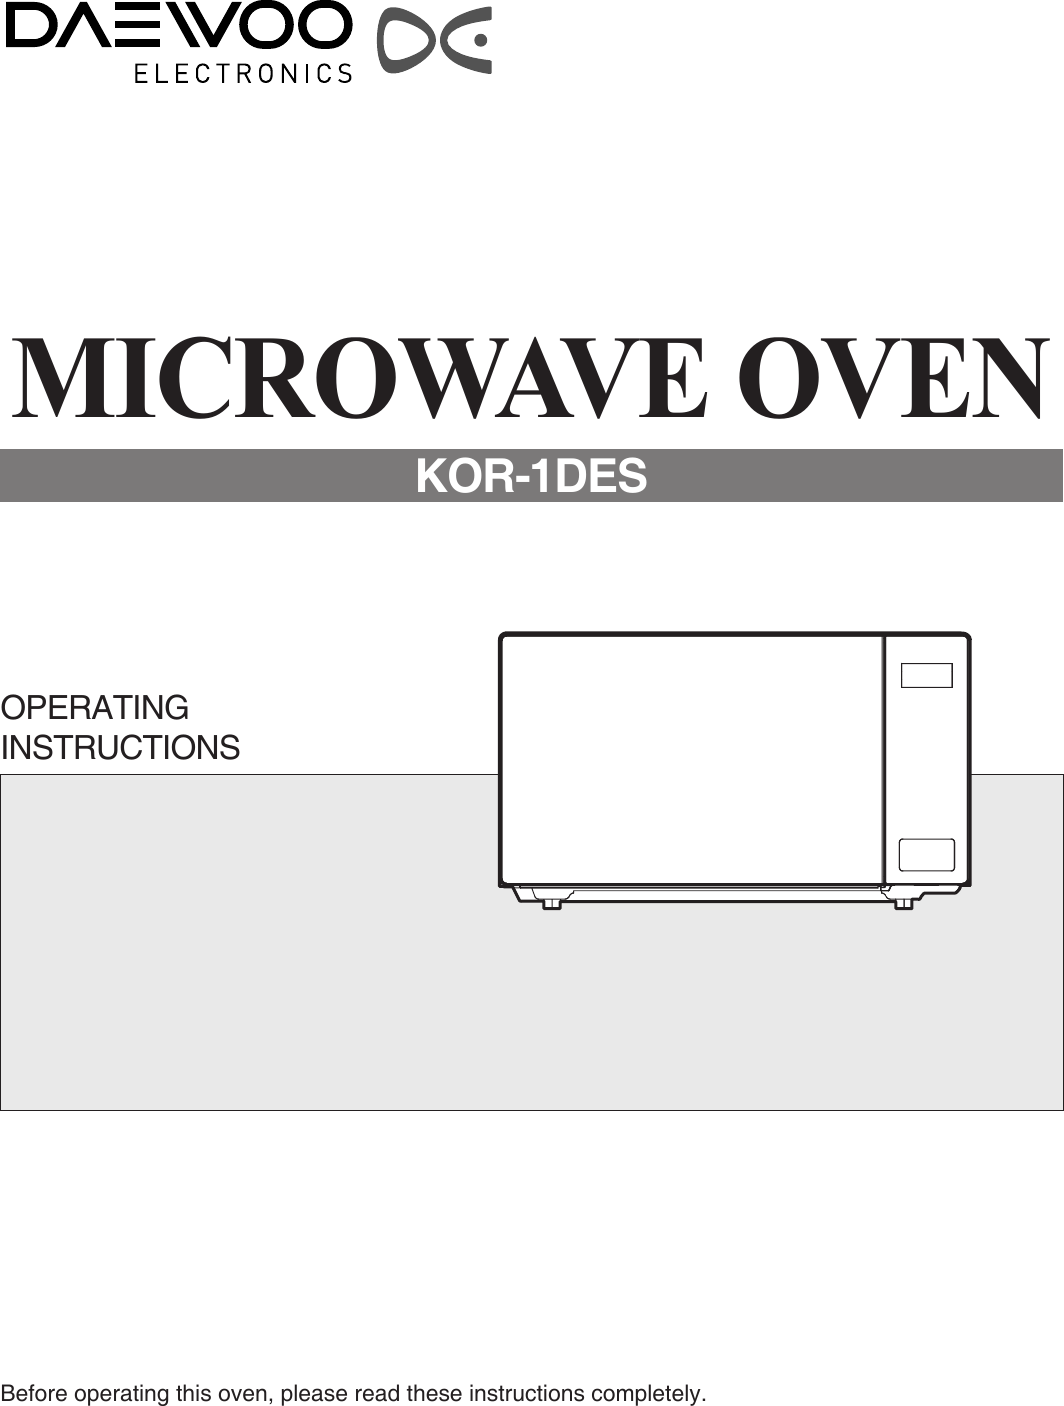 Before operating this oven, please read these instructions completely.OPERATINGINSTRUCTIONSMICROWAVE OVENKOR-1DES